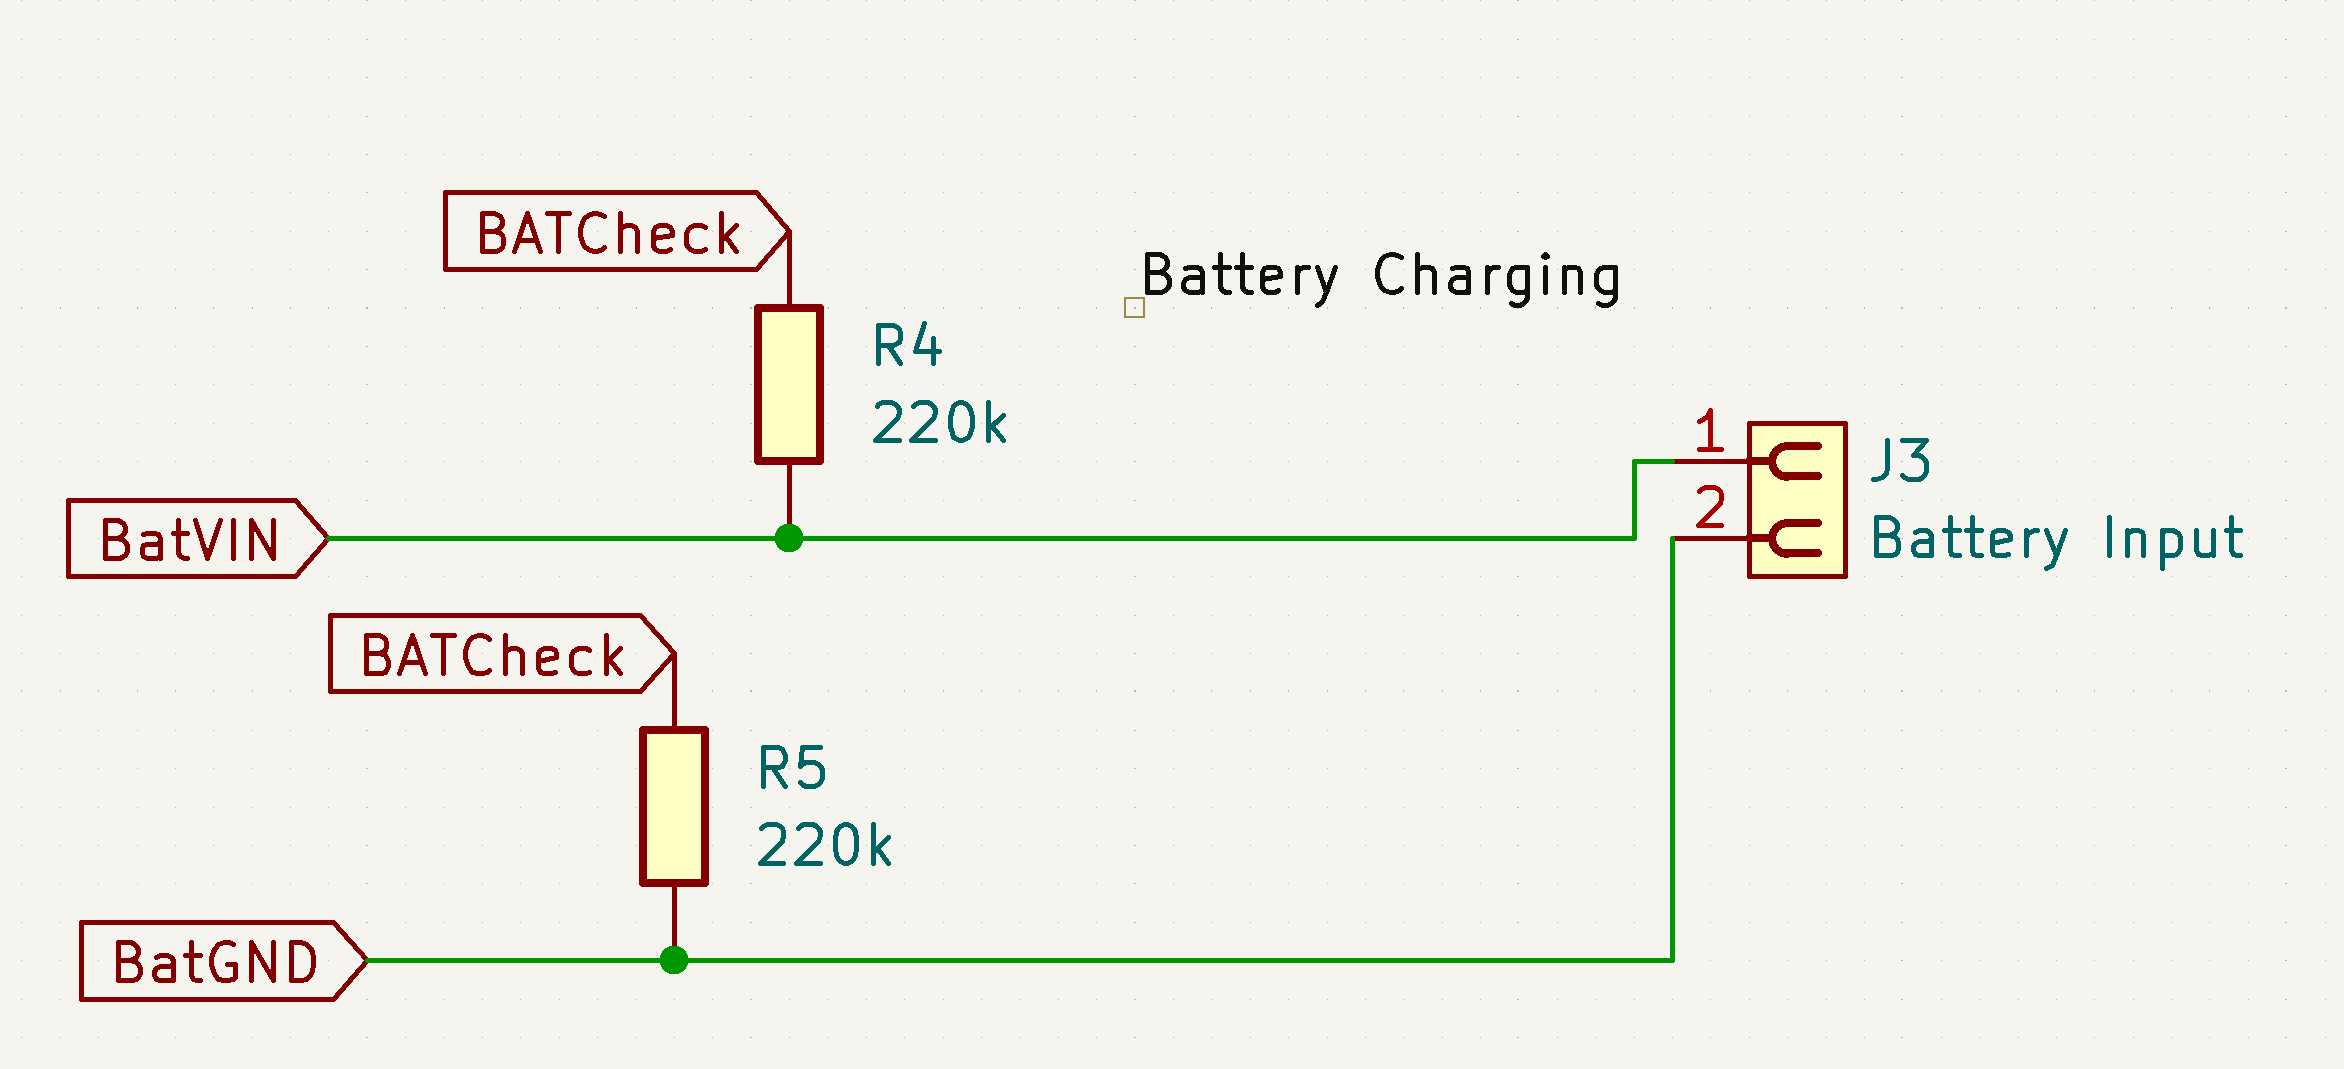 Battery charging connection